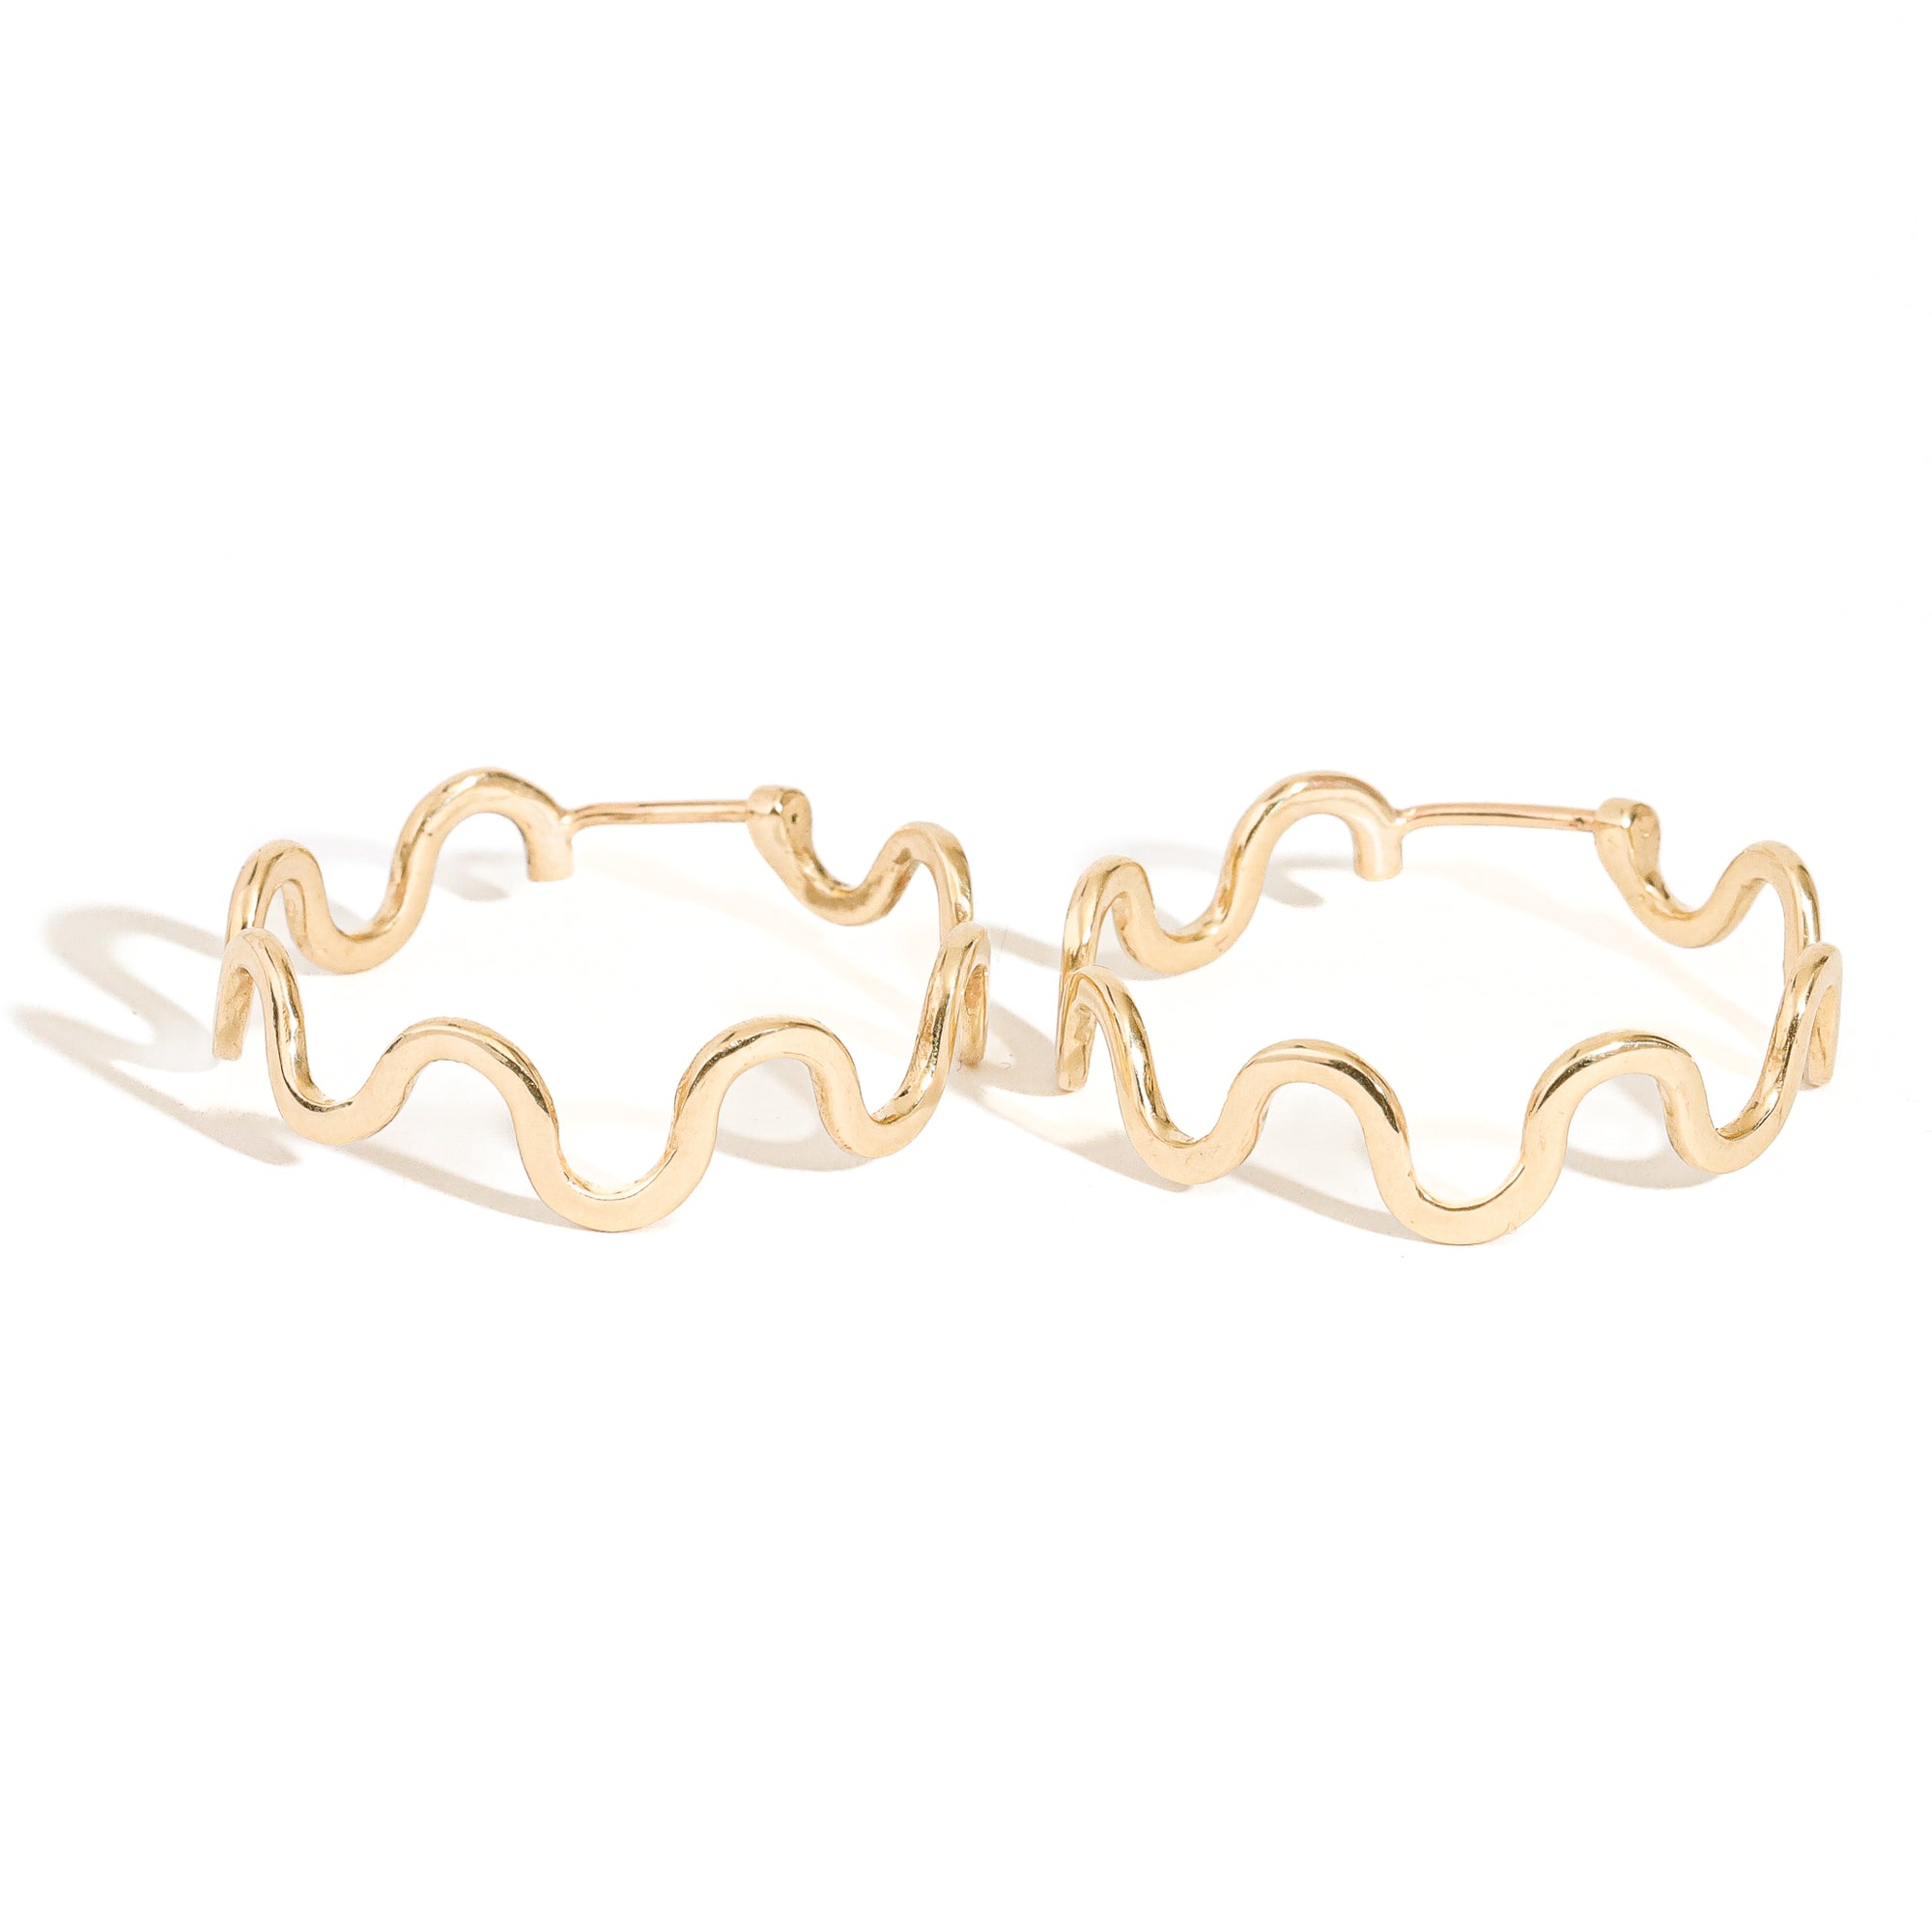 contemporary gold hoop earrings with ripple structure